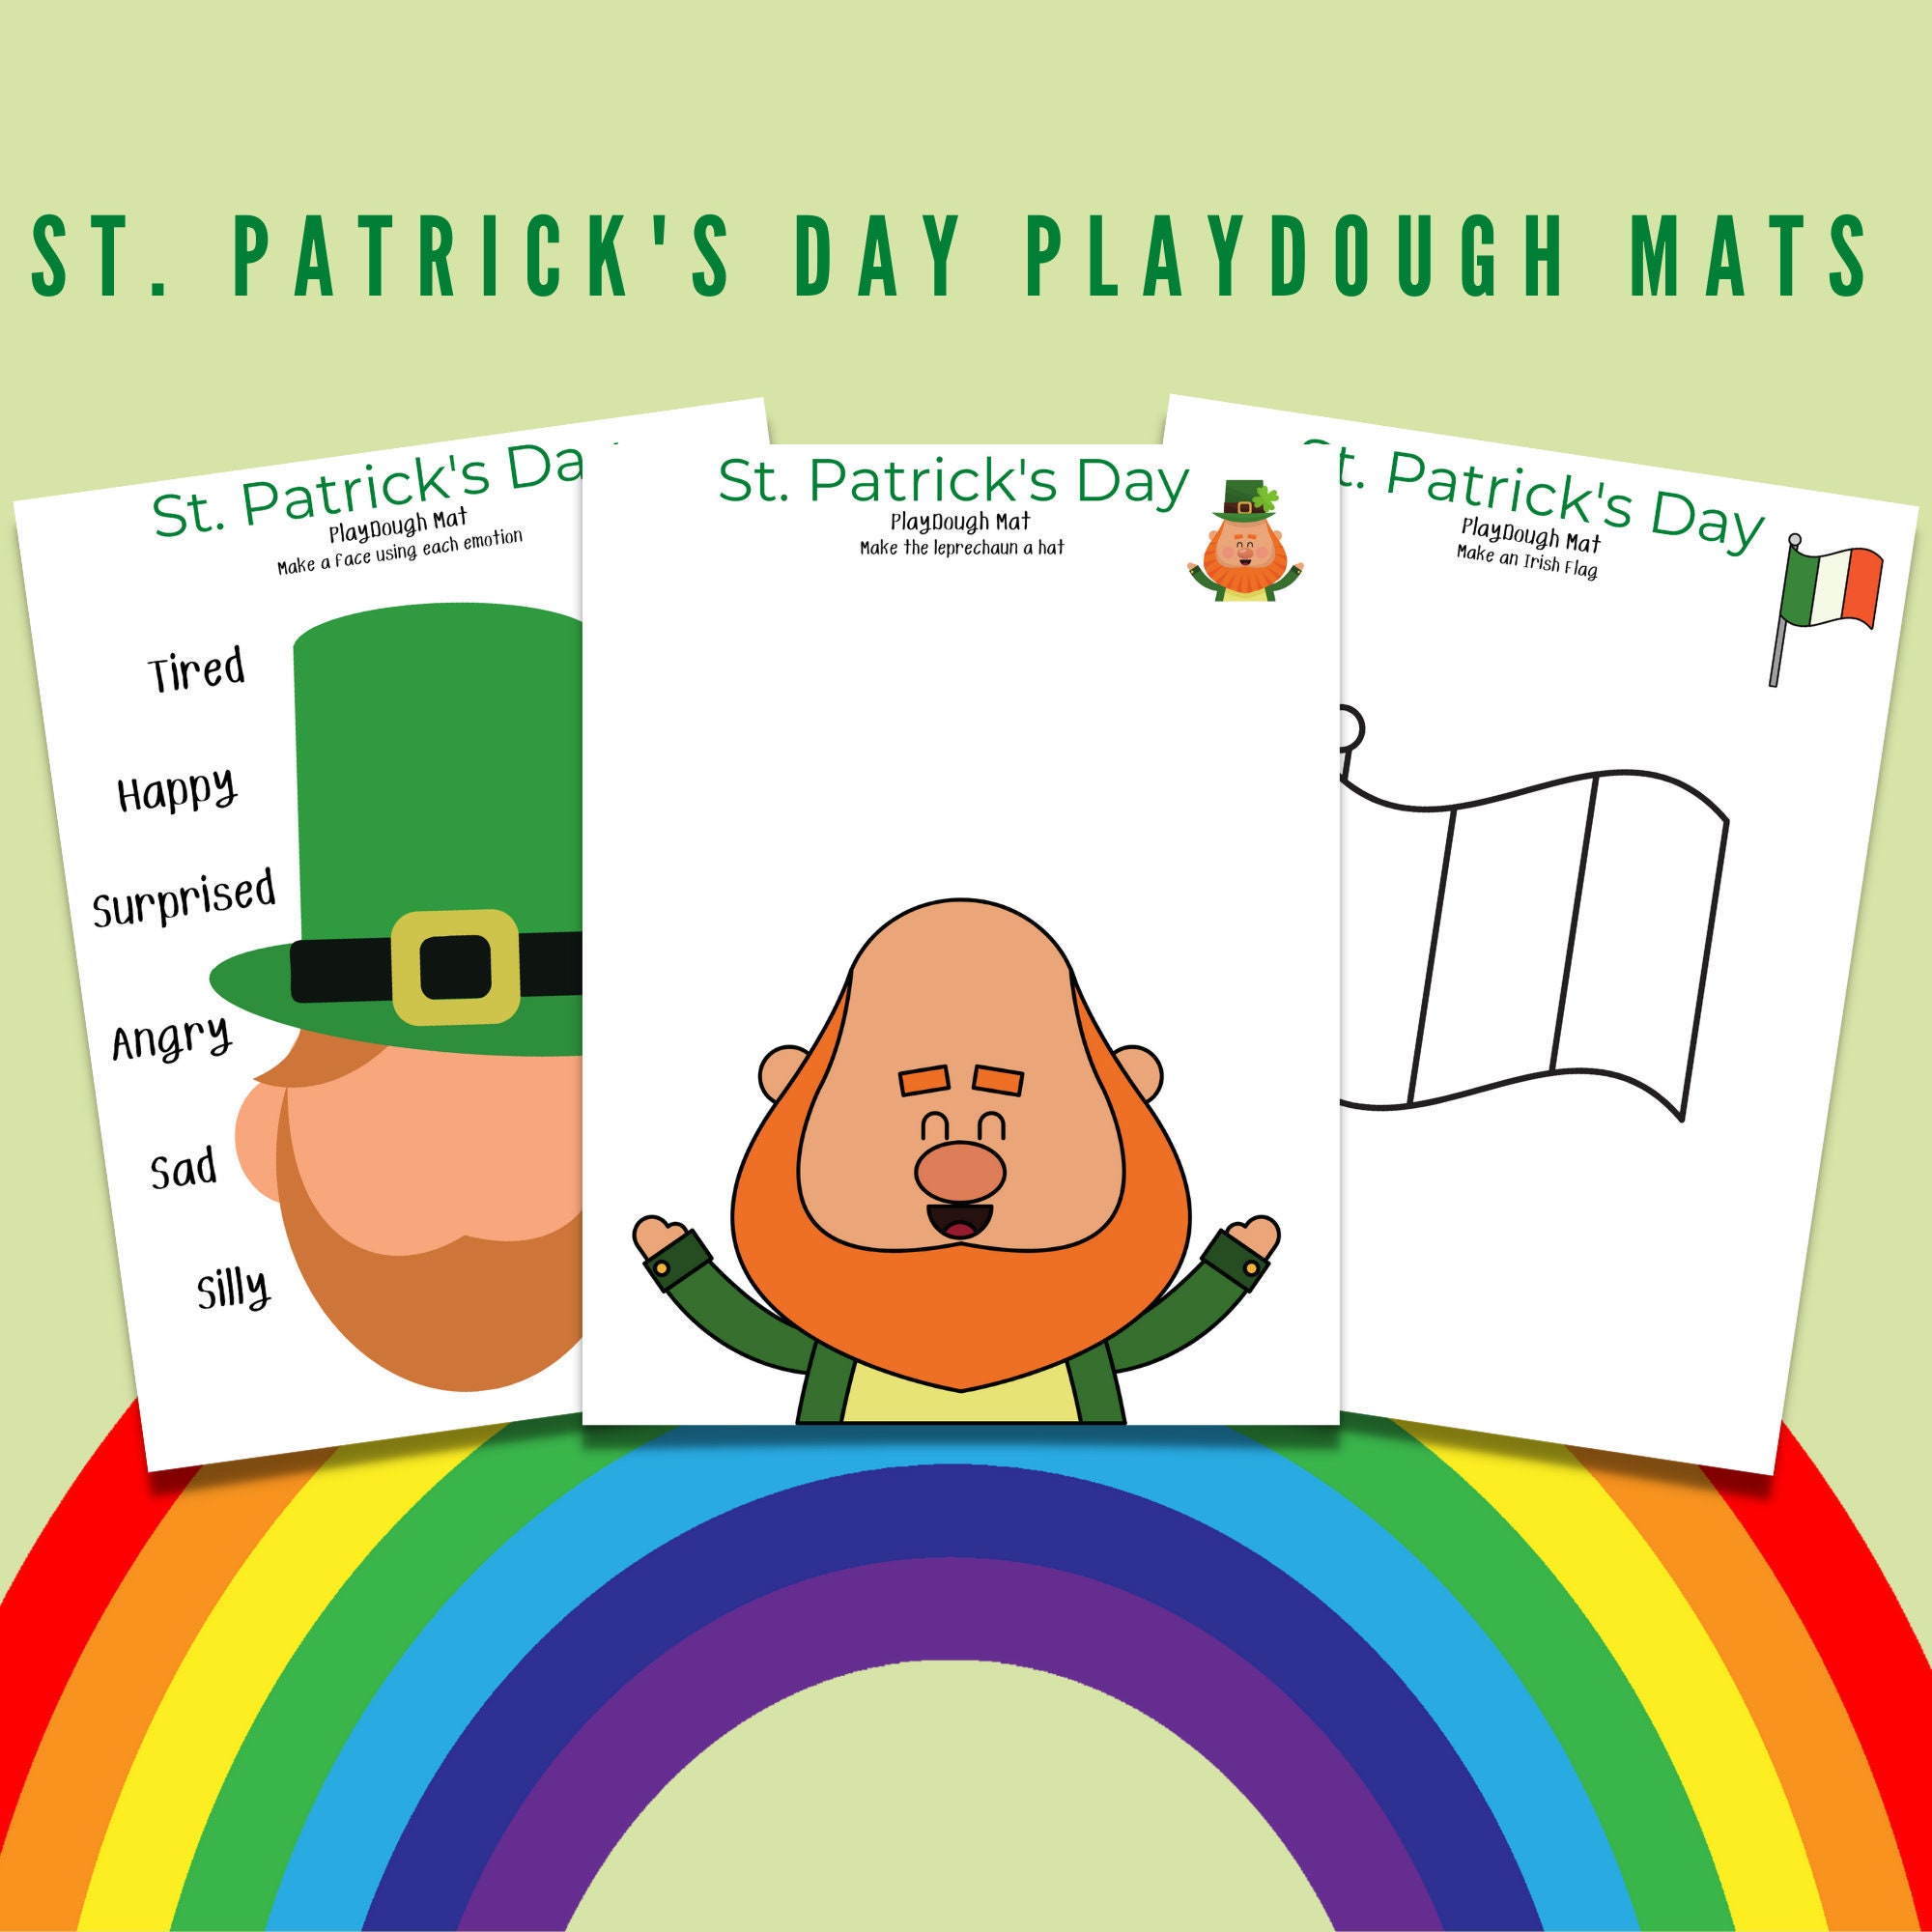 St. Patrick's Day Play Dough Mat - Only Passionate Curiosity